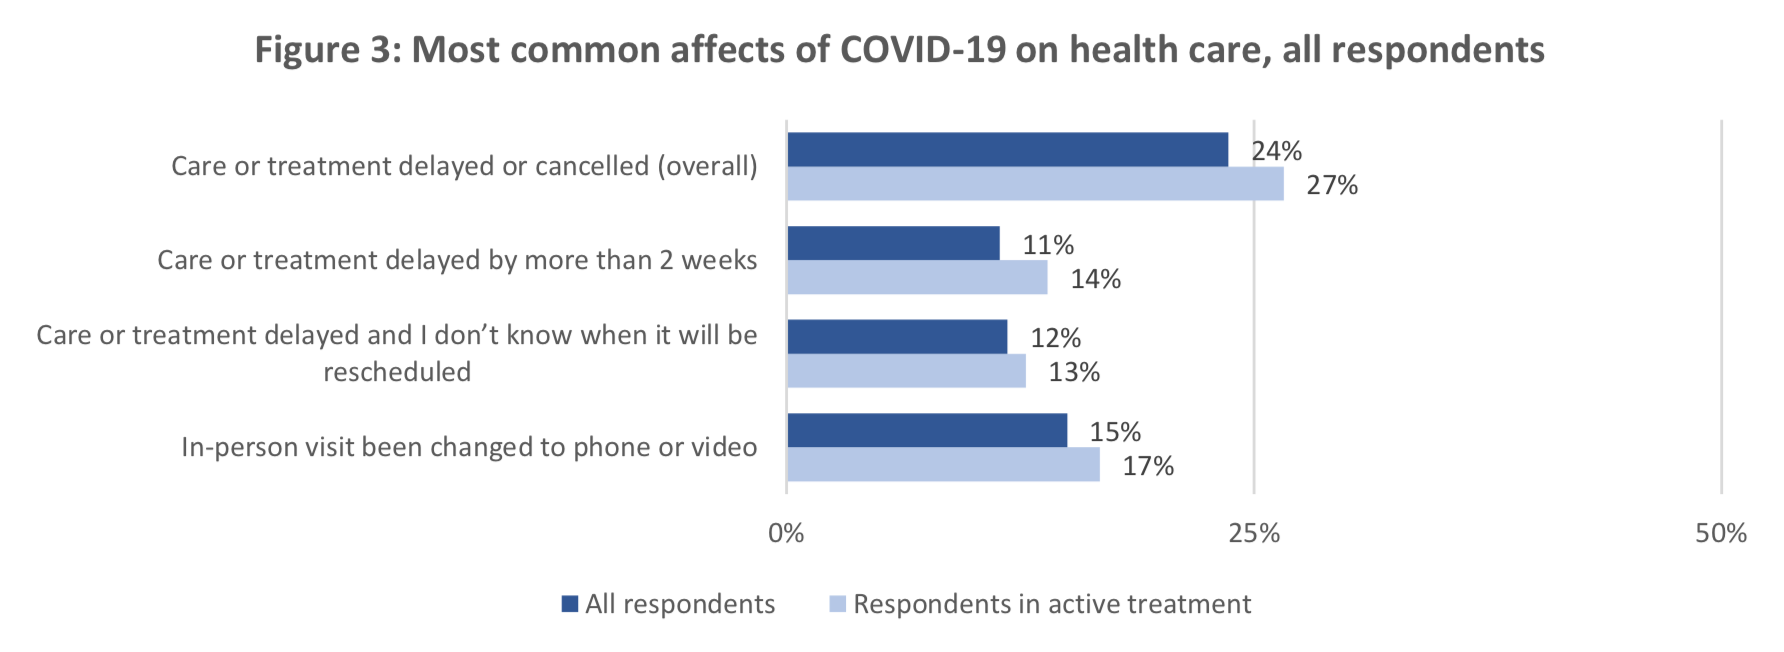 Figure 3: Most common affects of COVID-19 on health care, all respondents